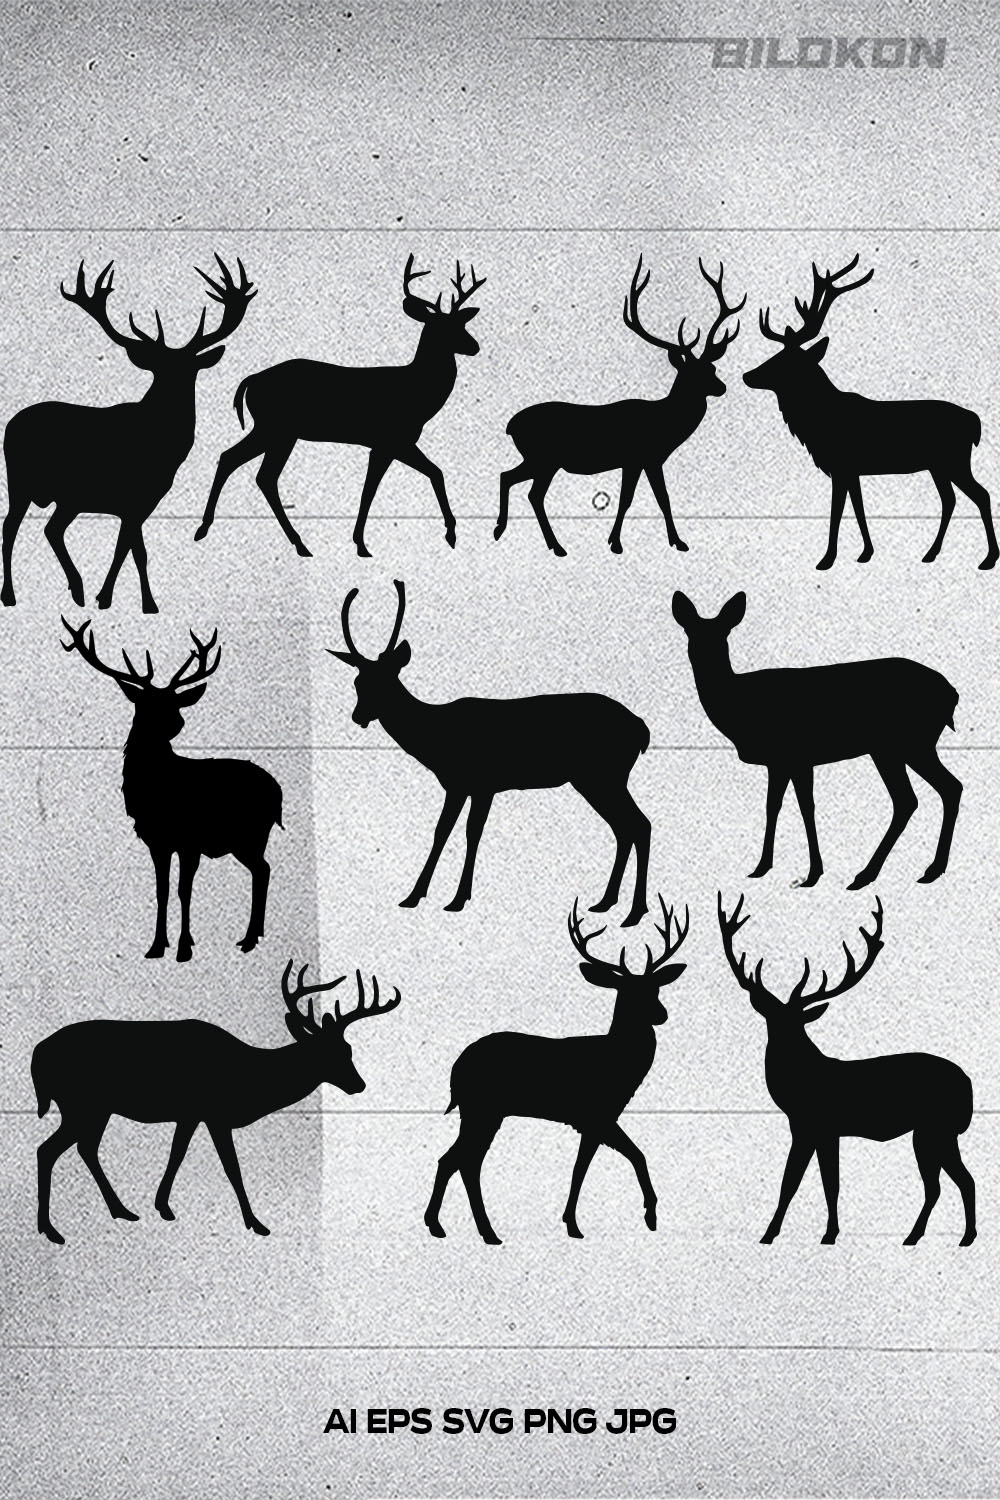 Group of deer silhouettes on a white background.